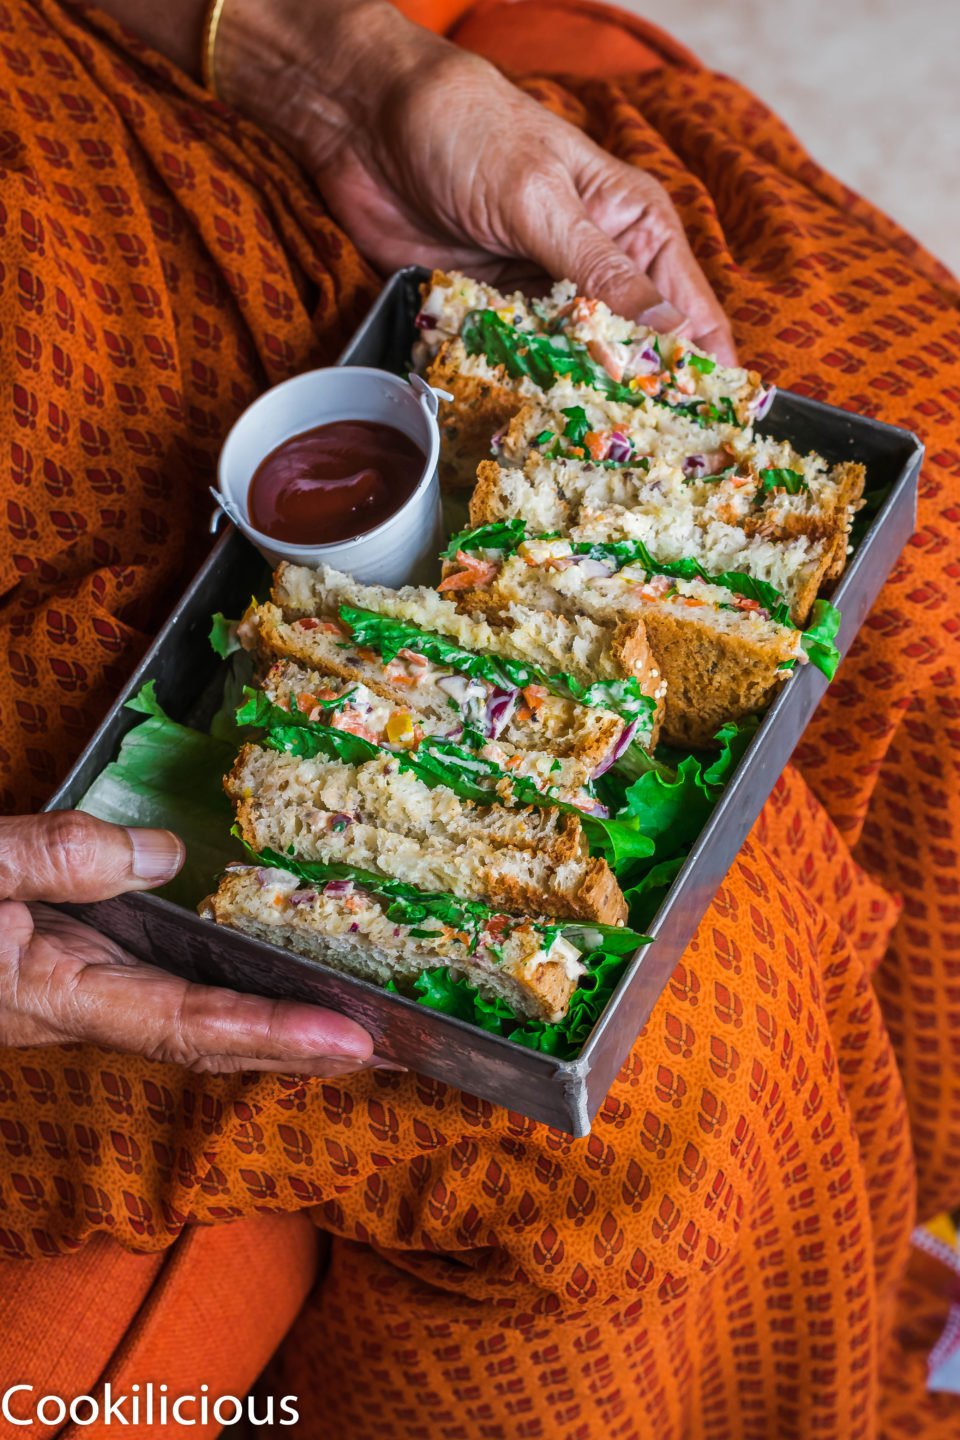 a tray filled with Indian Style Spiced Yogurt Sandwiches resting on the lap of a woman